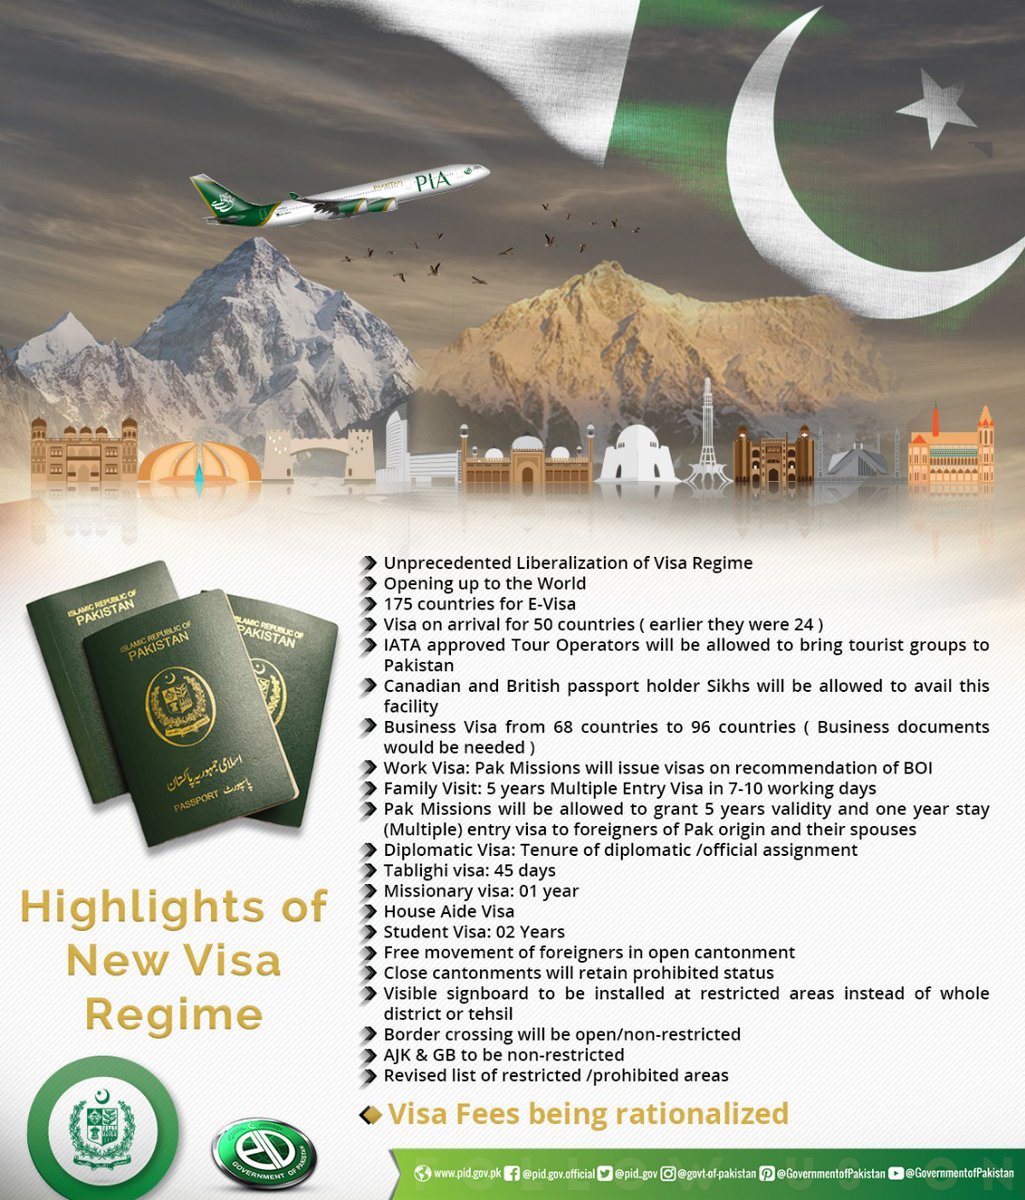 Highlights of Pakistan's 'New Visa Policy'